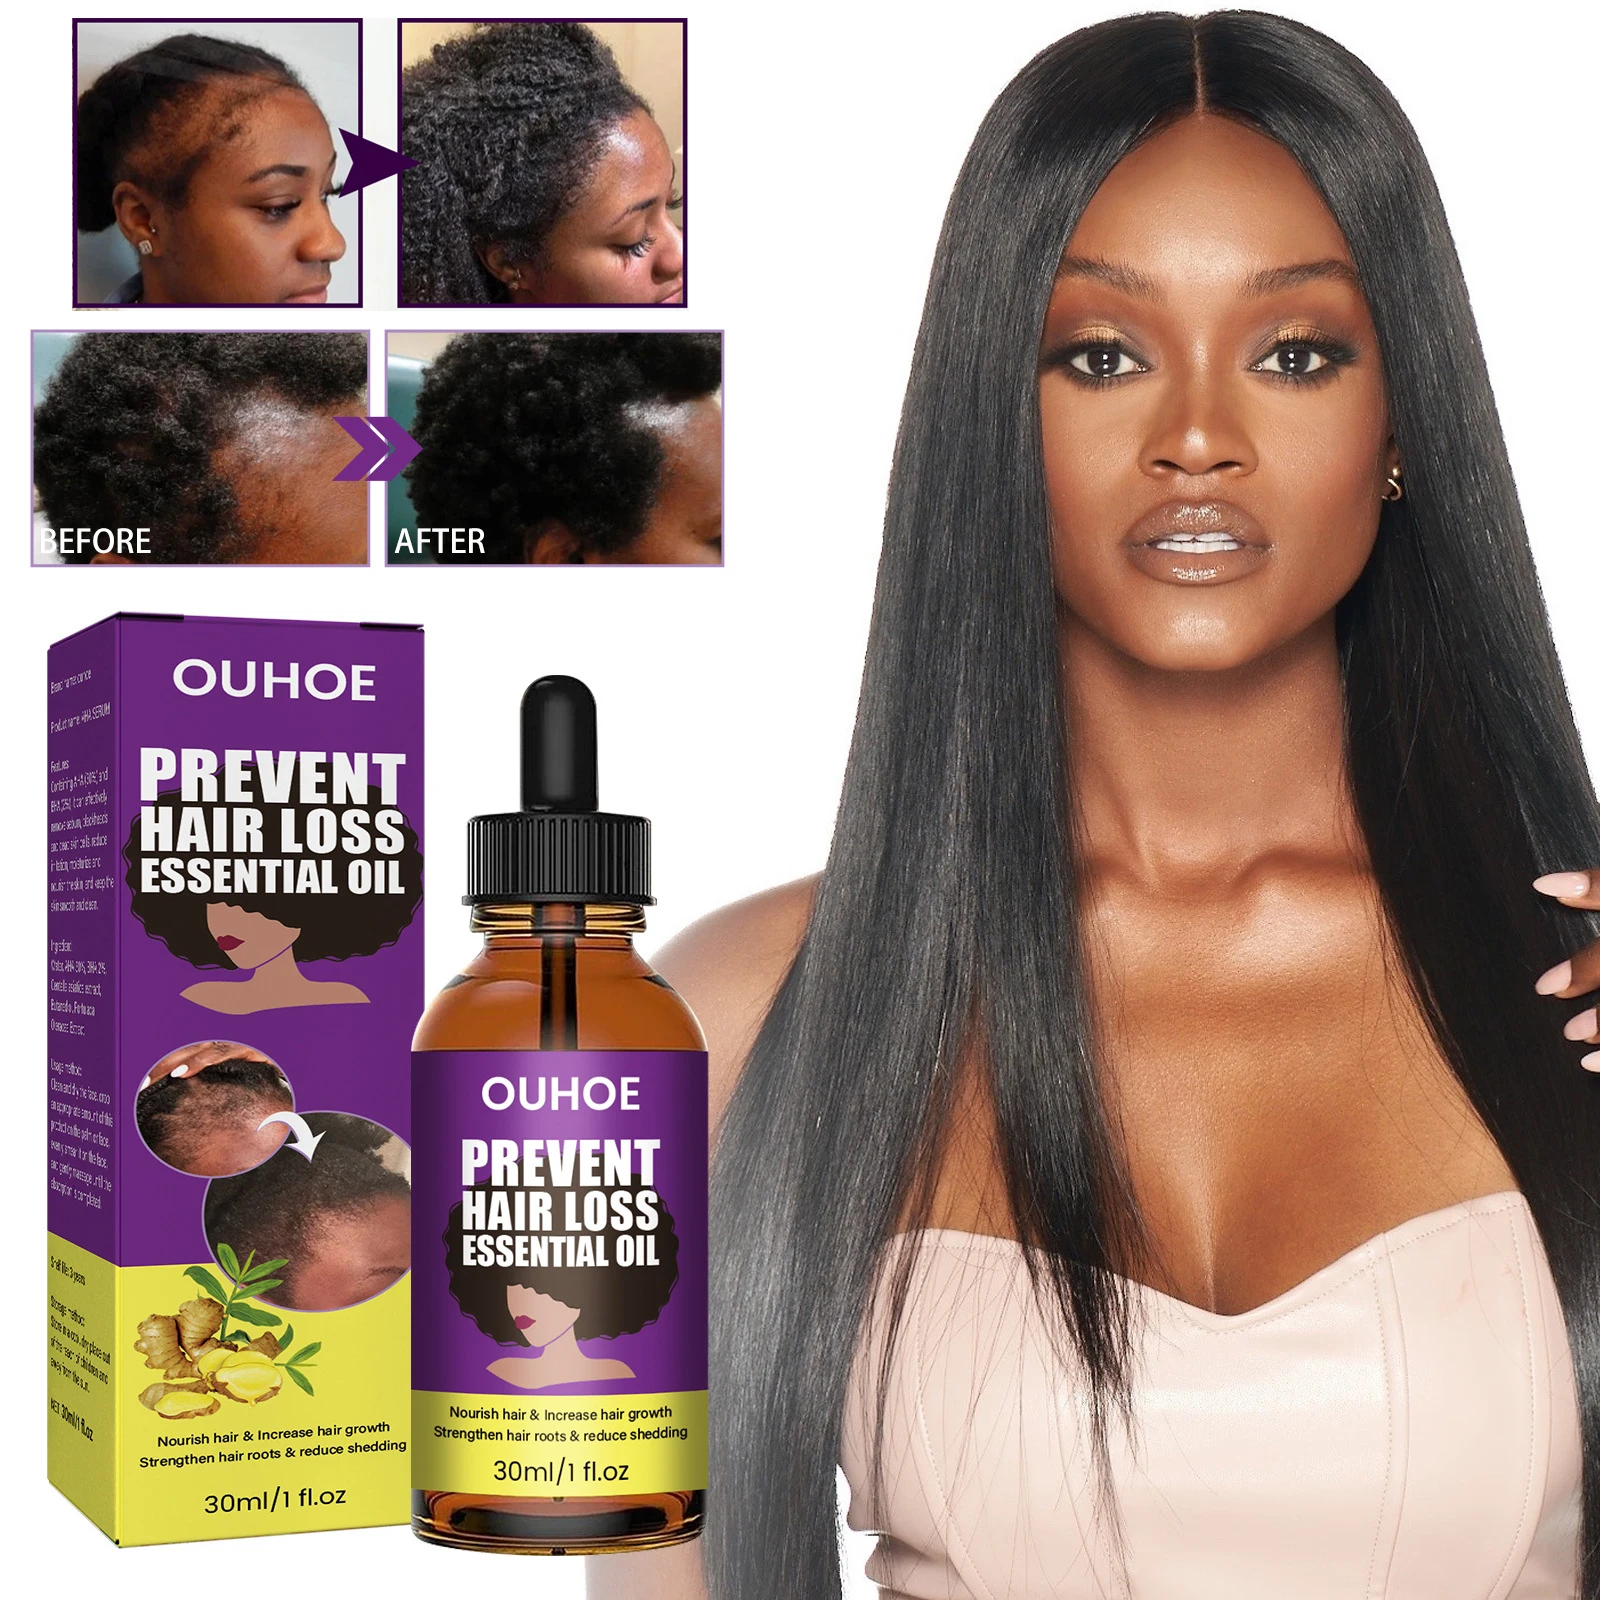 

Africa Wild Ginger Hair Growth Essential Oil Traction Alopecia Hair Loss Prevent Edges Bald Spots Thinnin Increasing Soften Hair